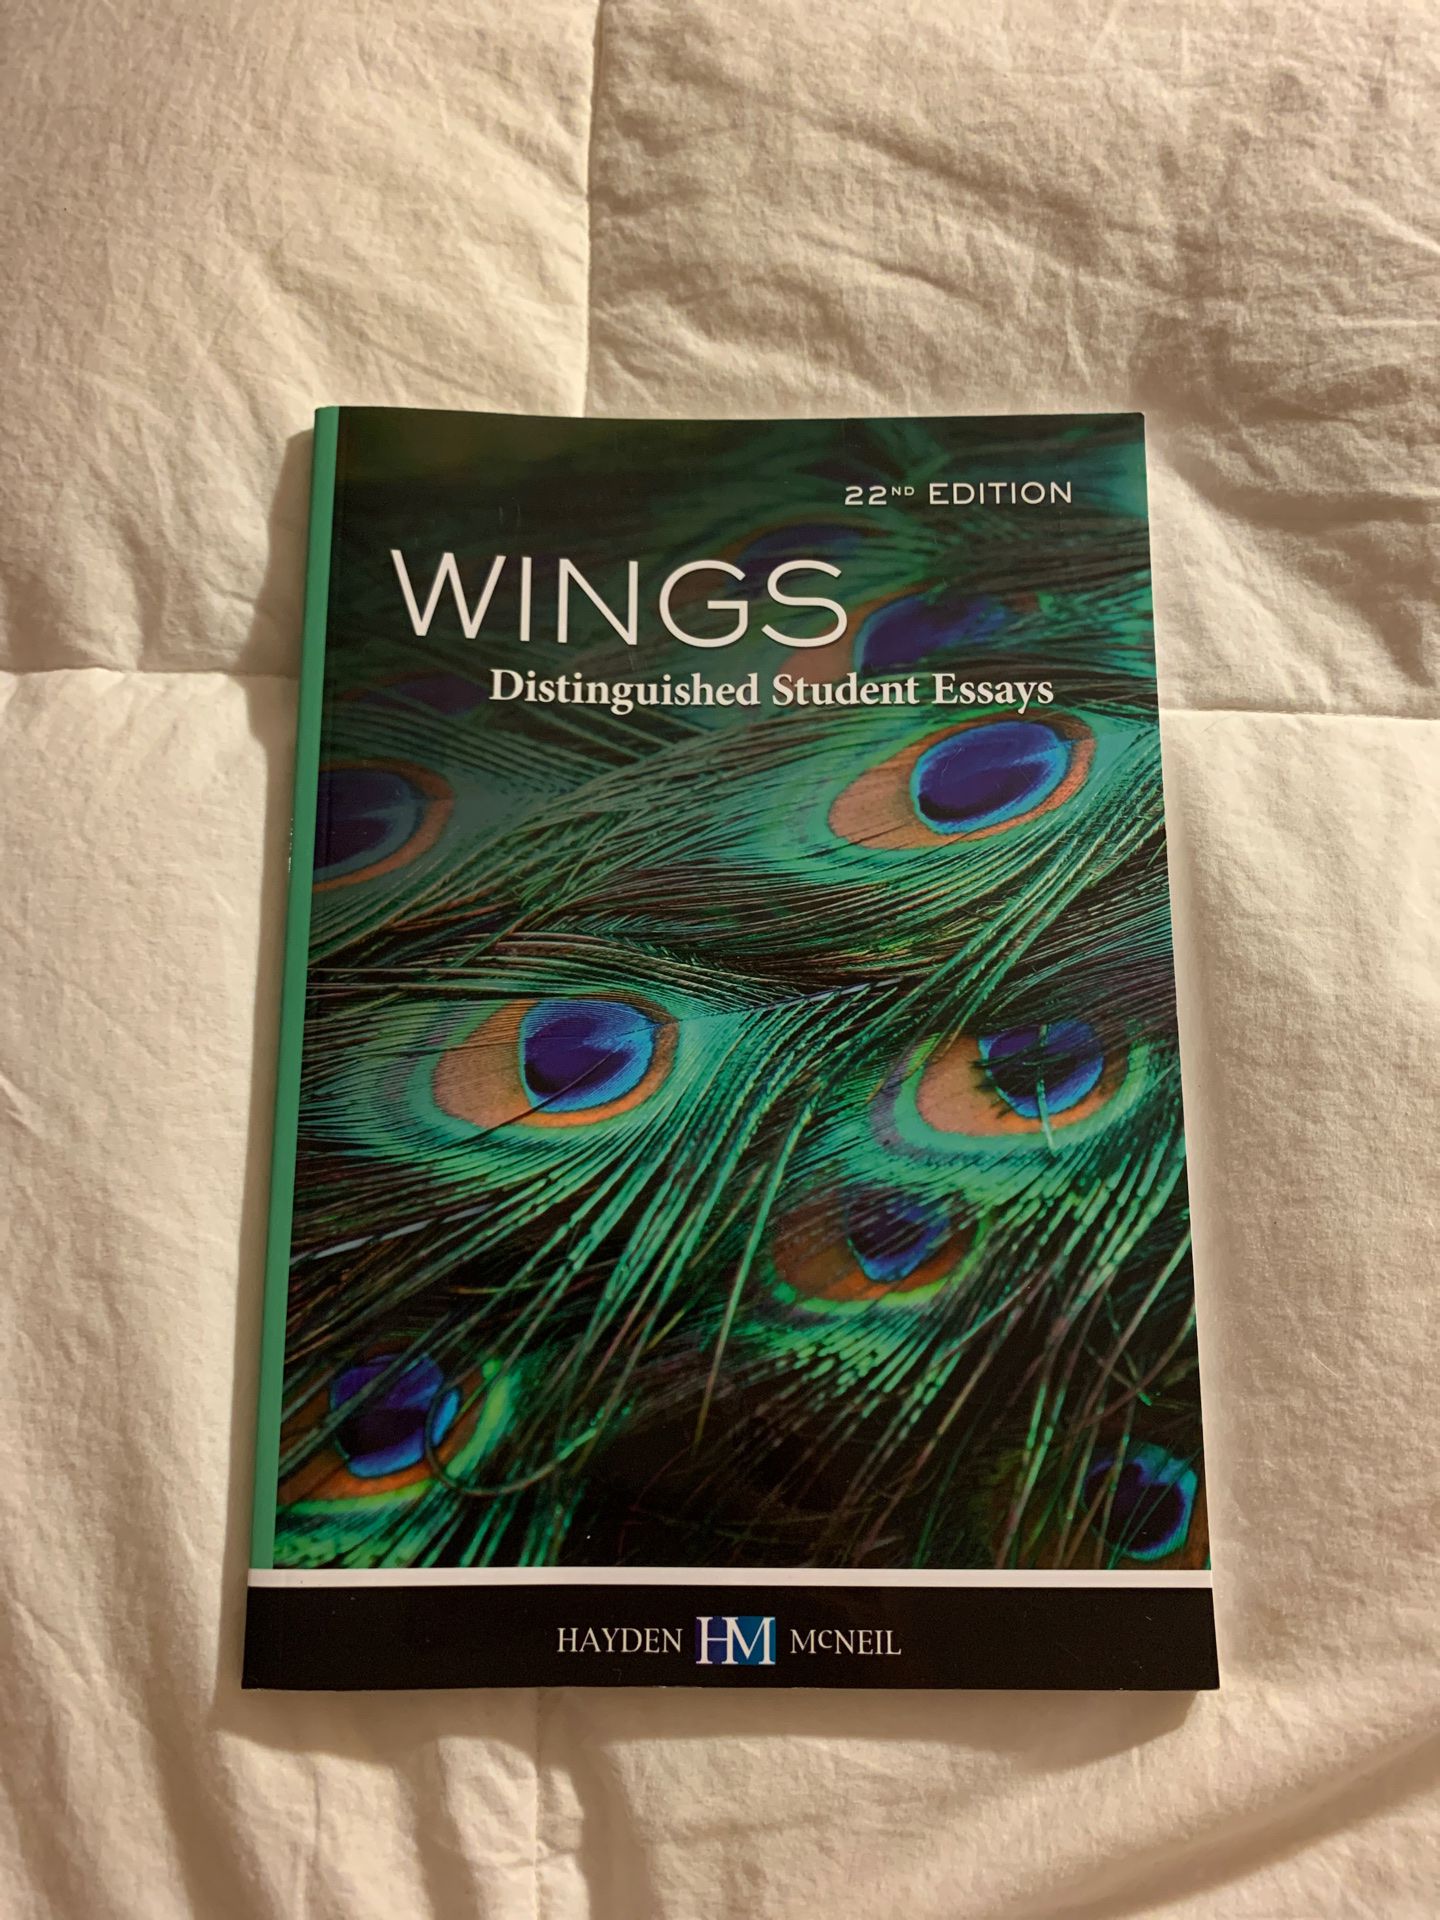 WINGS Distinguished Student Essays 22nd Edition